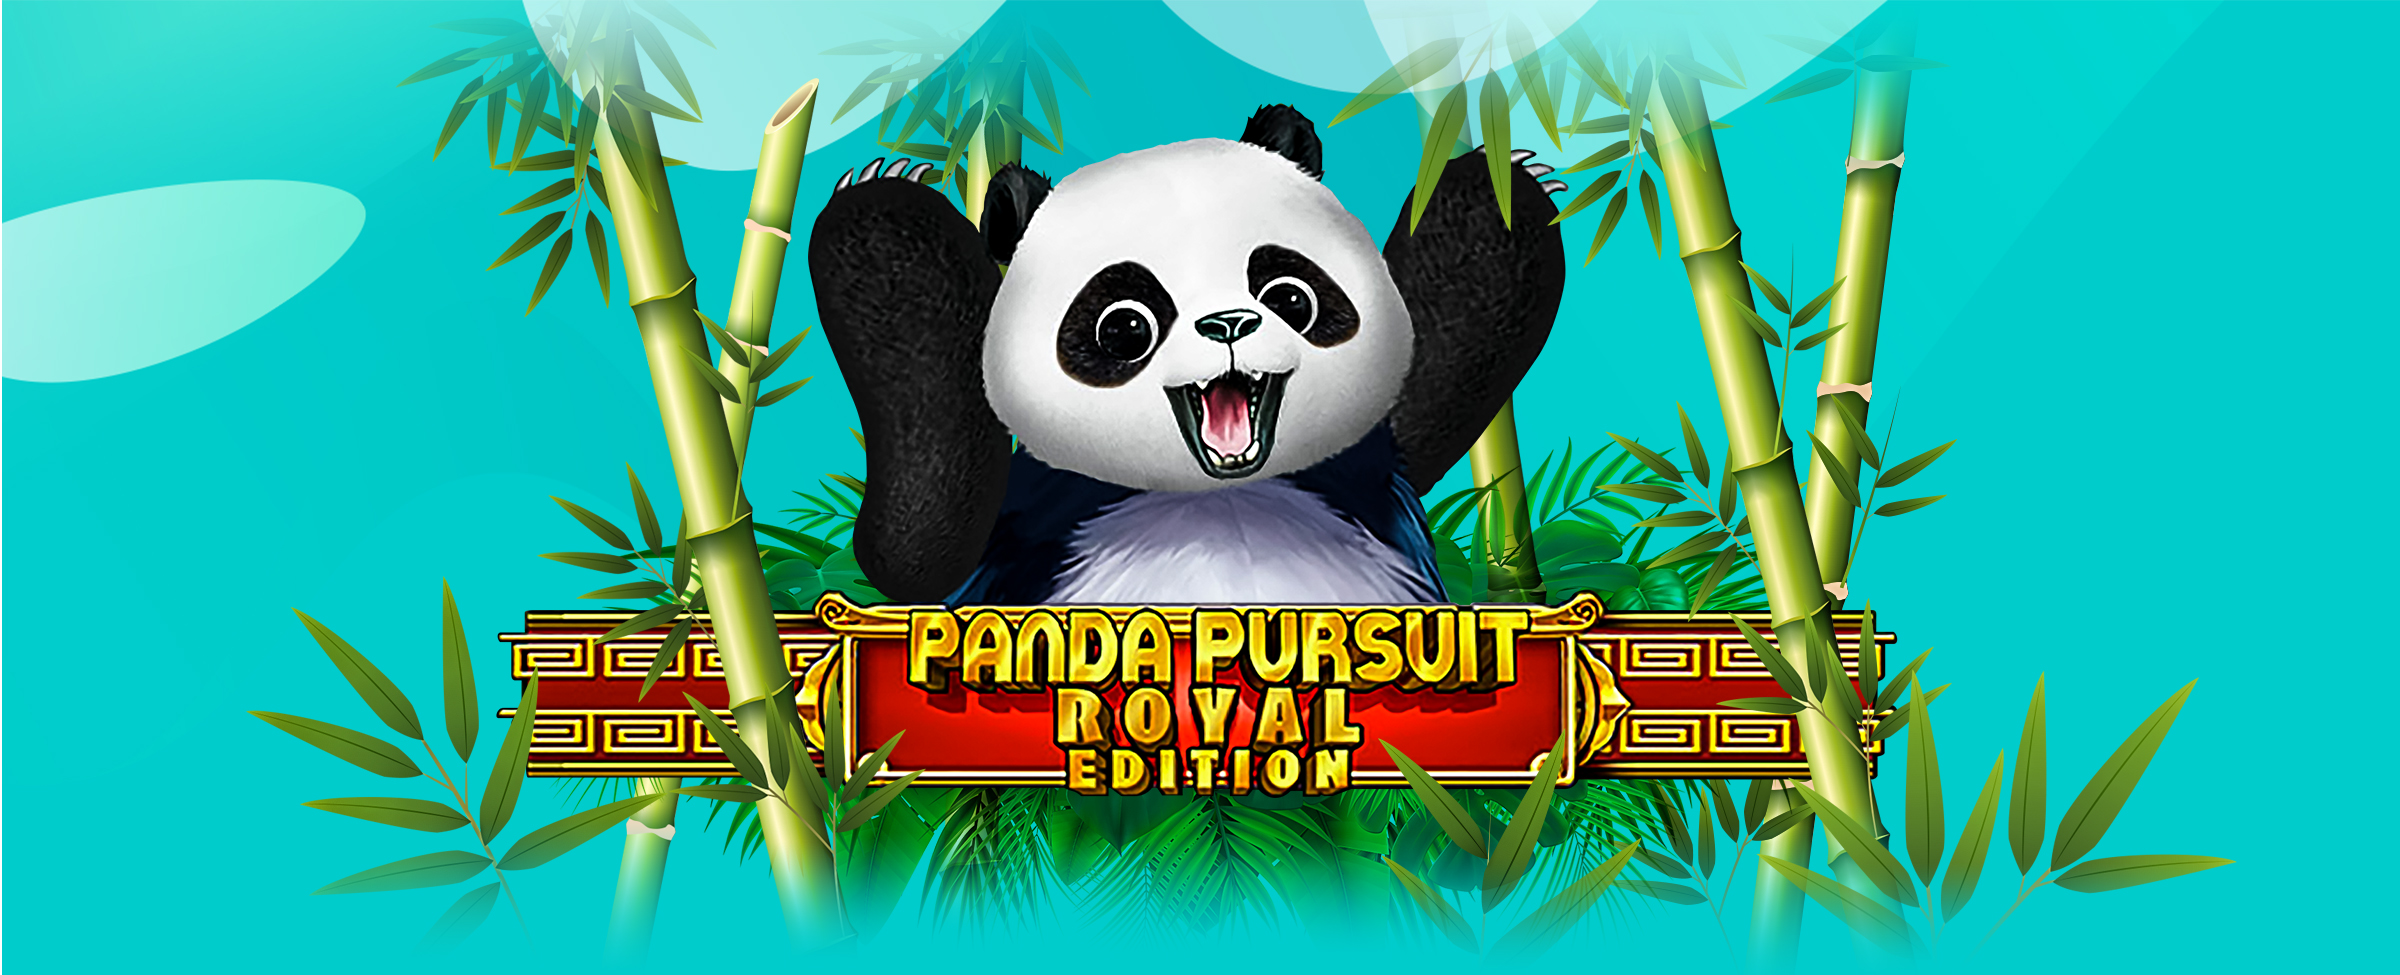 If outdoors is your theme, then you’re going to love Panda Pursuit: Royal Edition. Find out what makes this online slot game great.